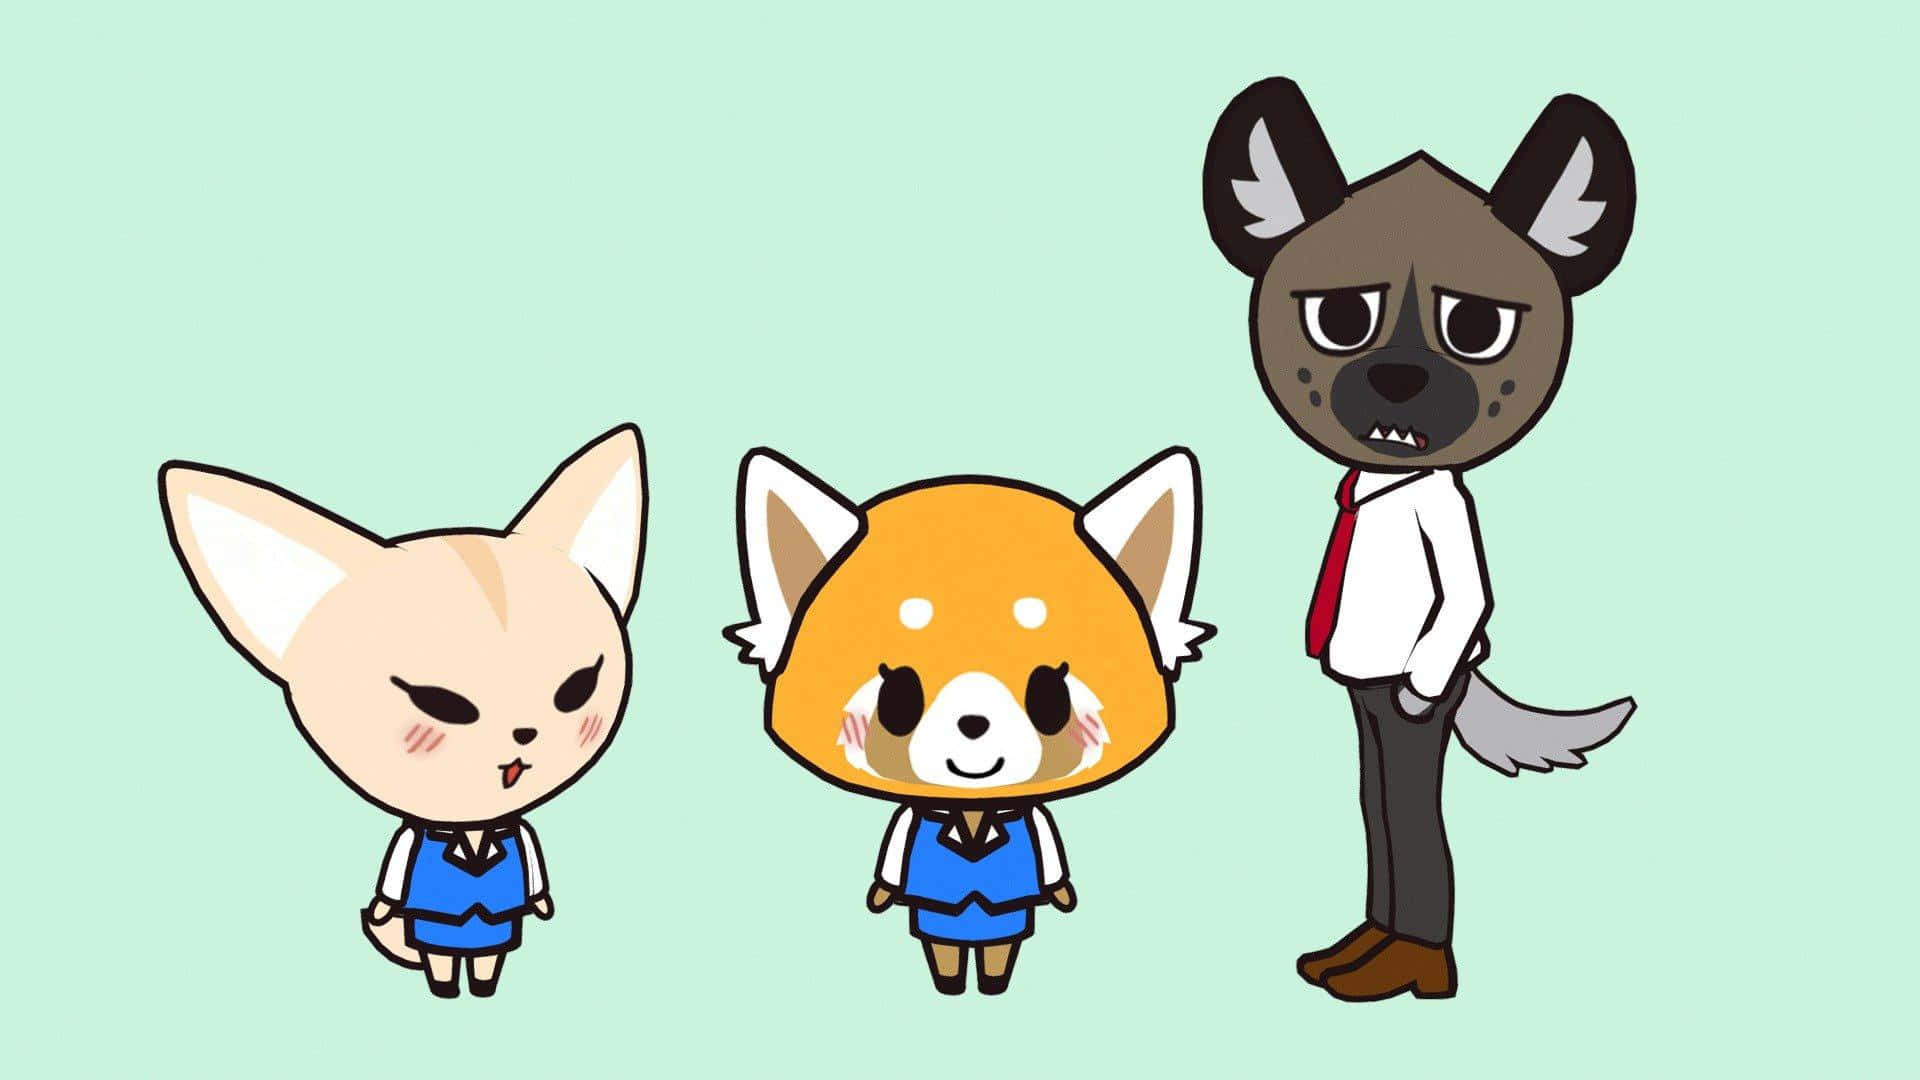 Aggretsuko coping with stress